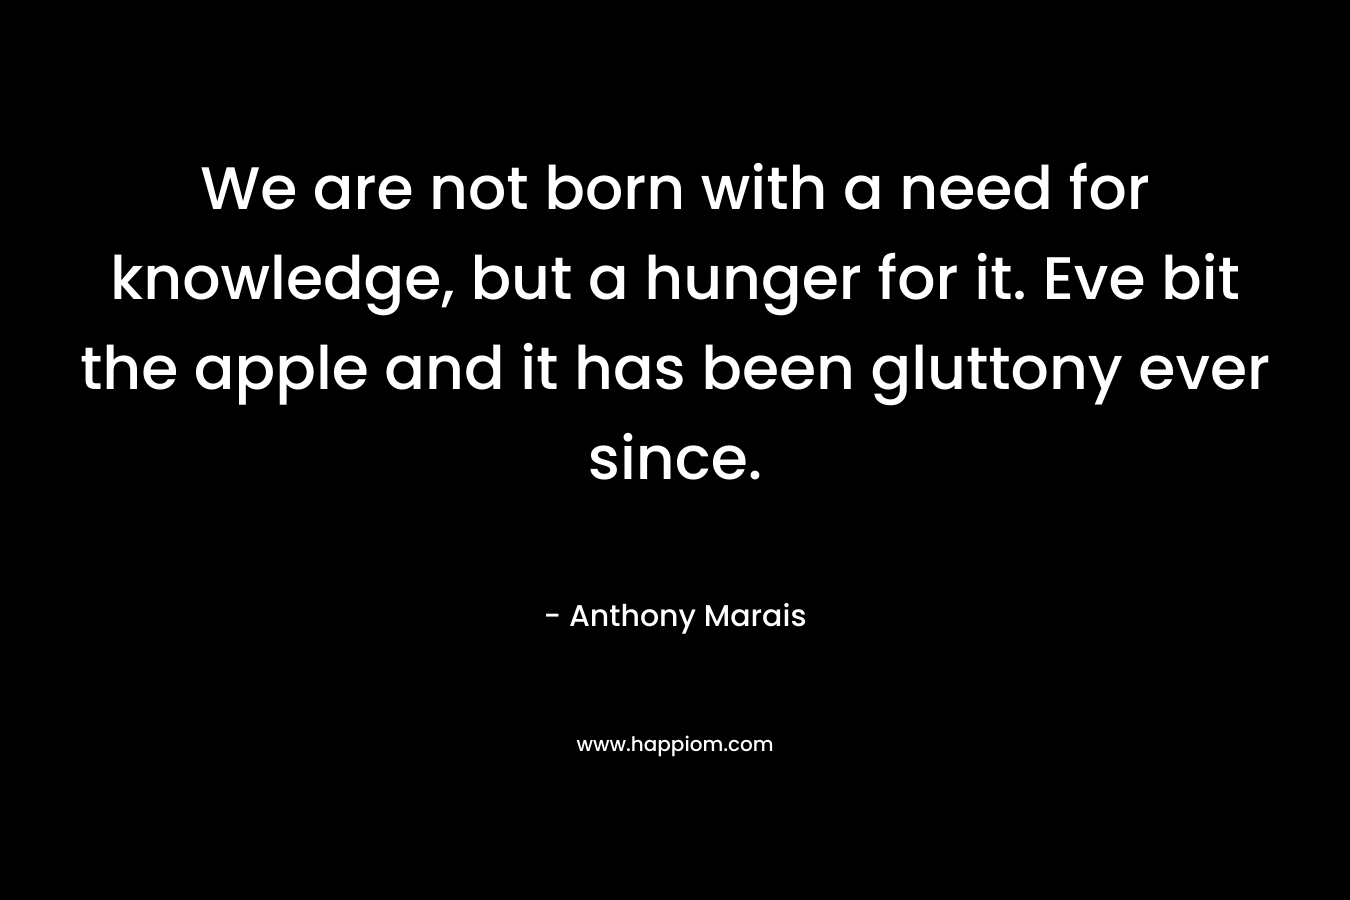 We are not born with a need for knowledge, but a hunger for it. Eve bit the apple and it has been gluttony ever since.